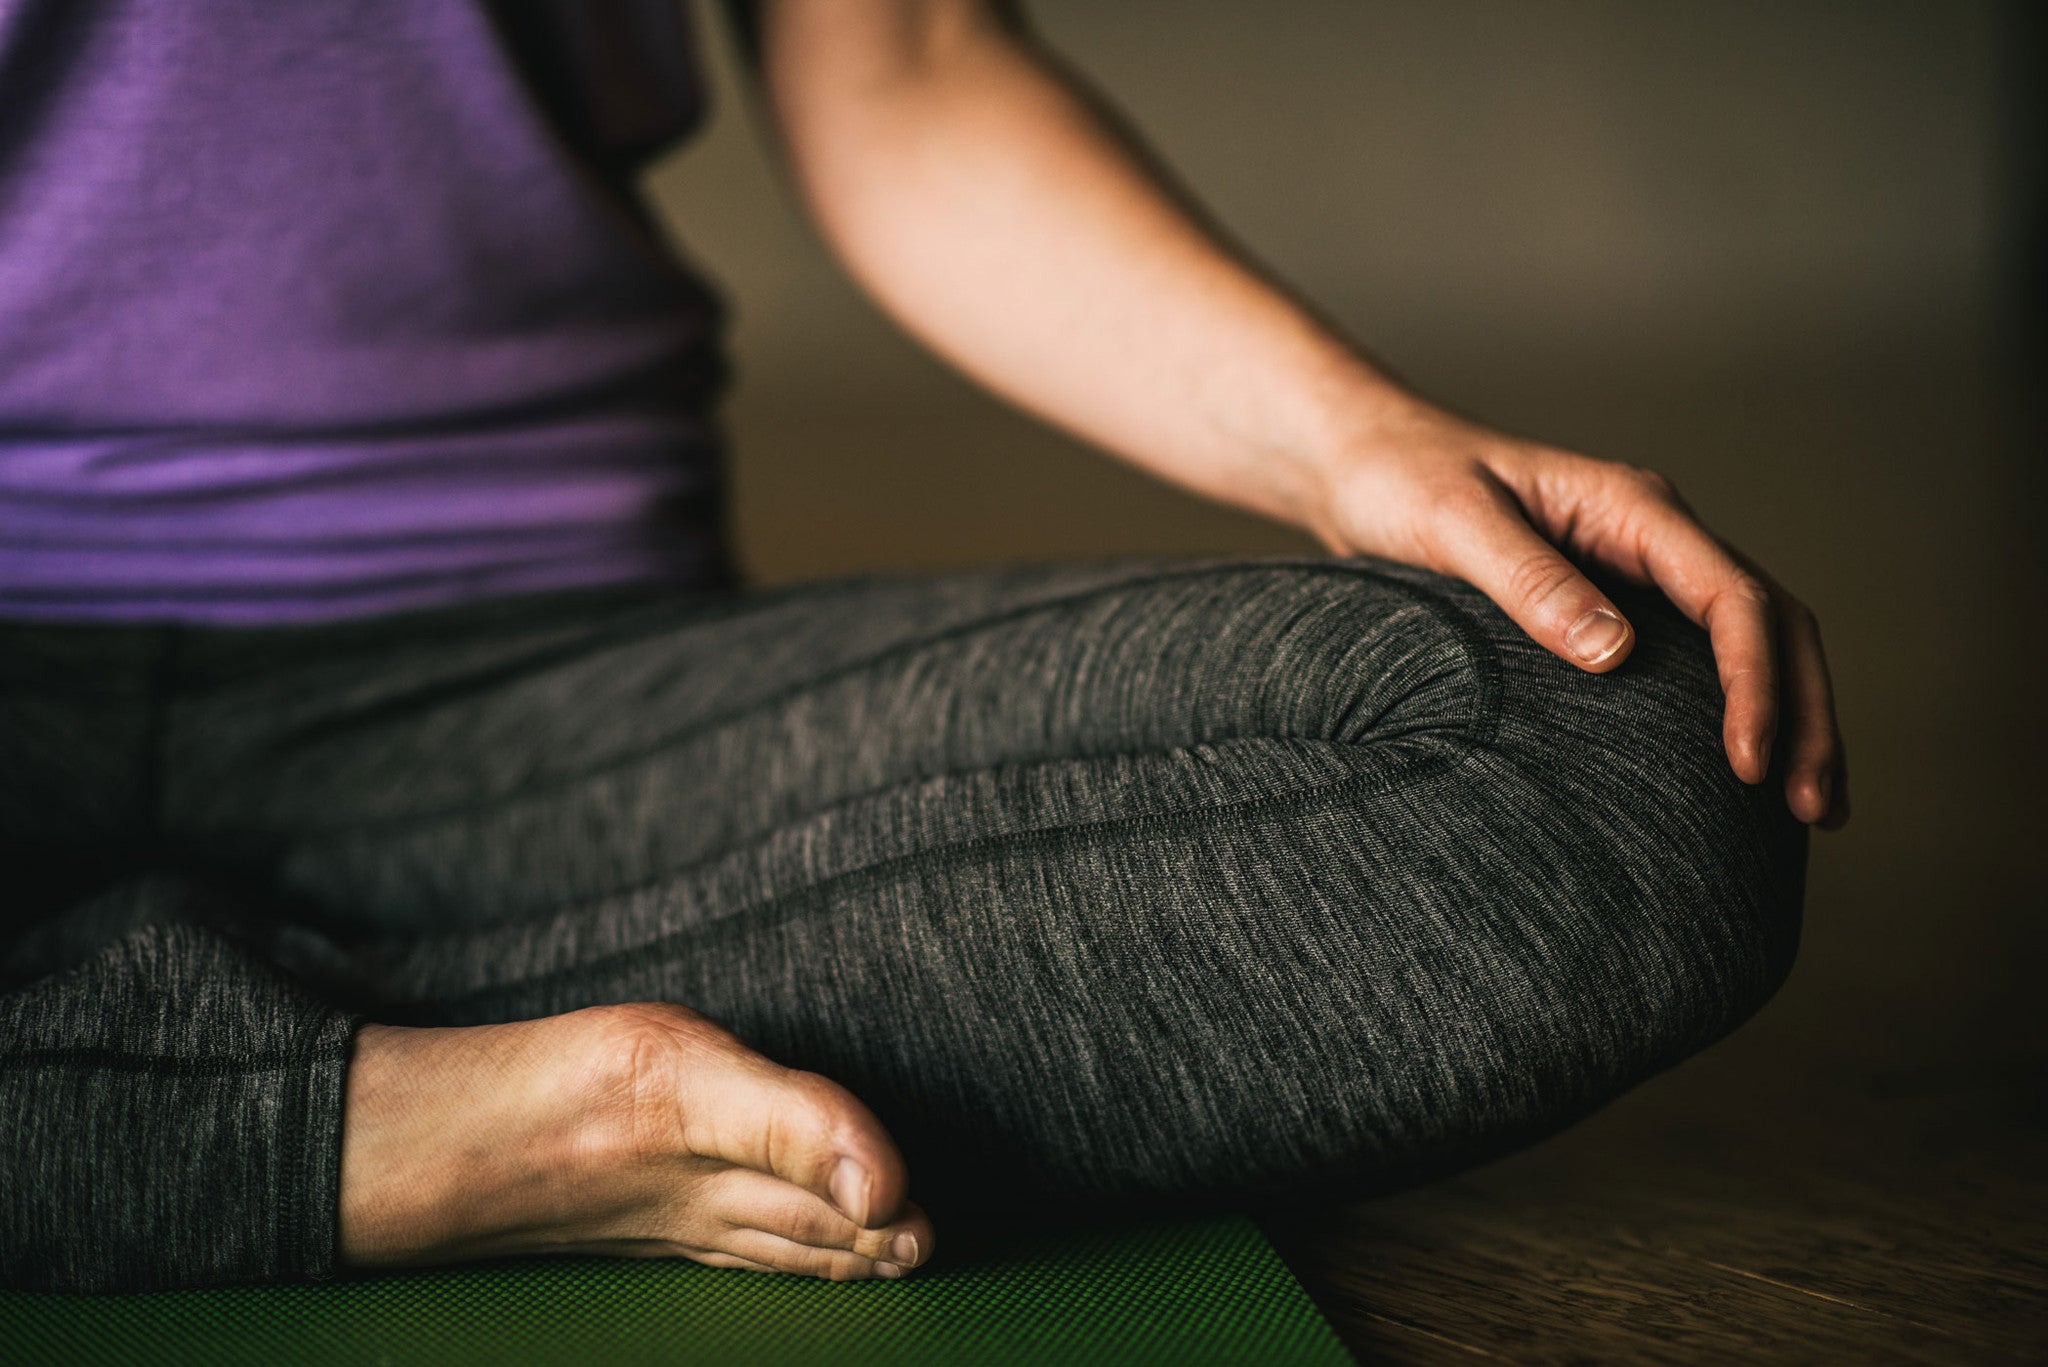 Do You Have to Sit Cross-Legged in Lotus Position to Meditate? - Gaiam